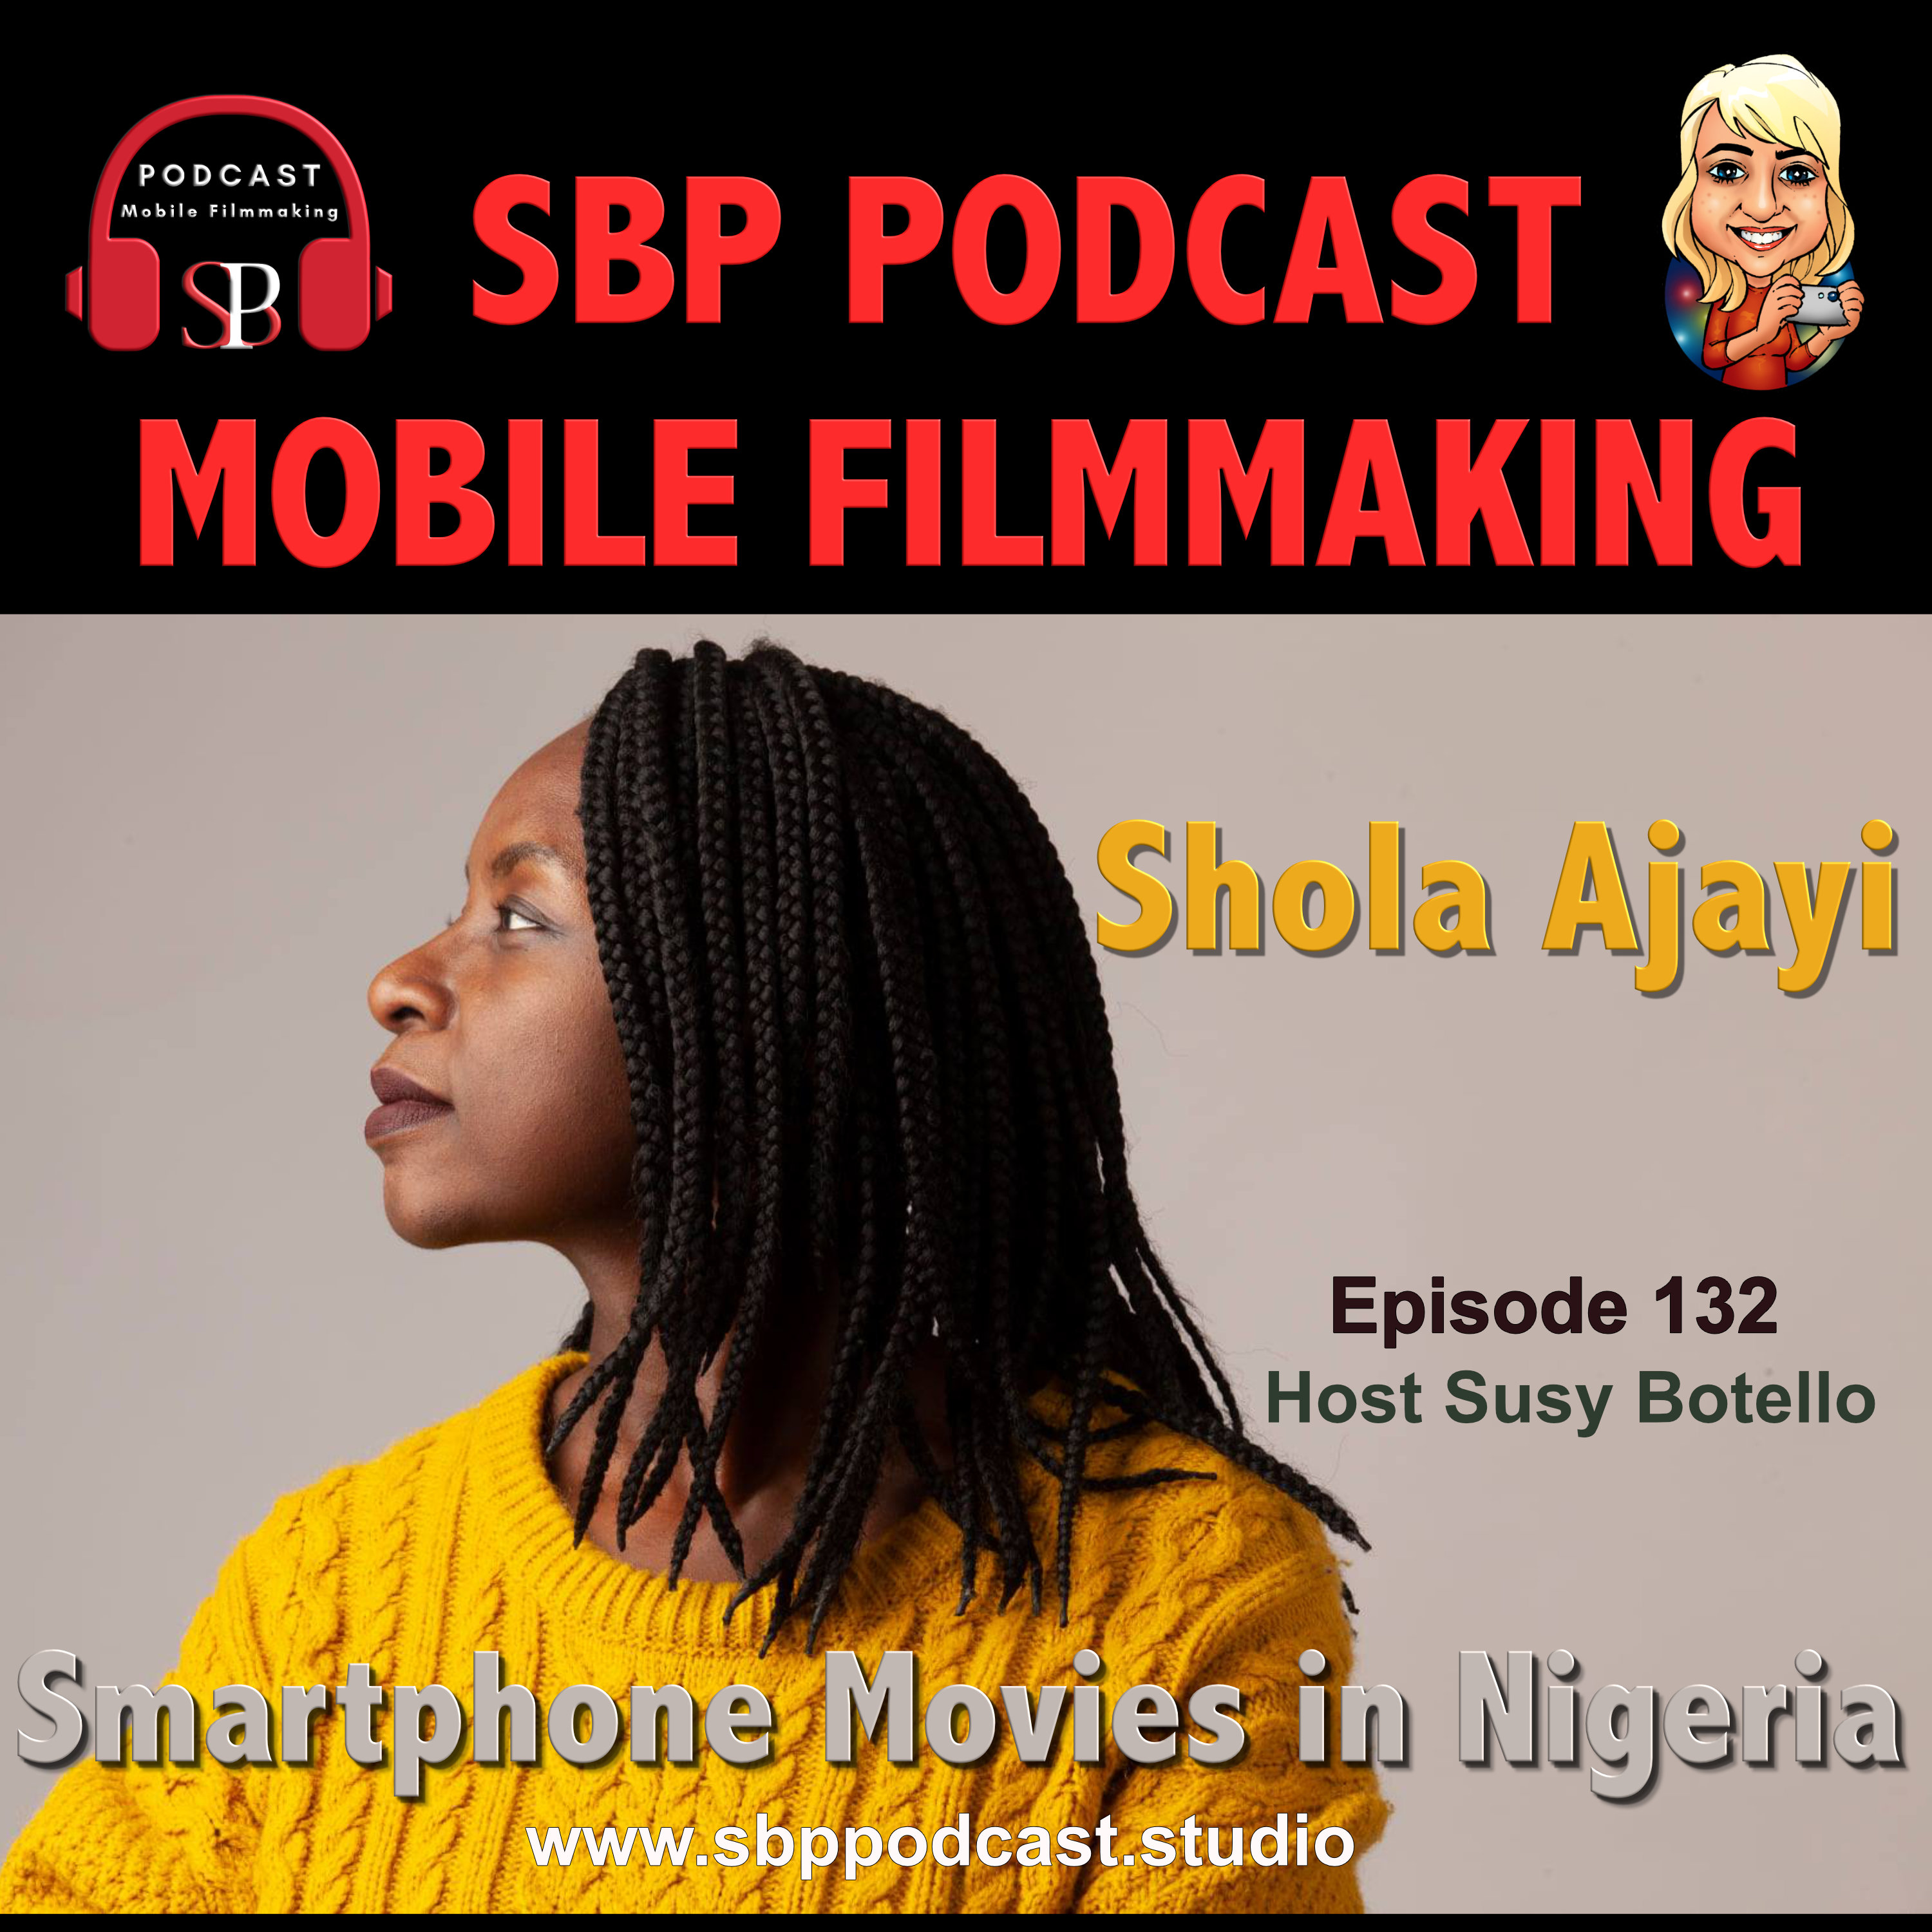 Smartphone Movies in Nigeria with Shola Ajayi Image